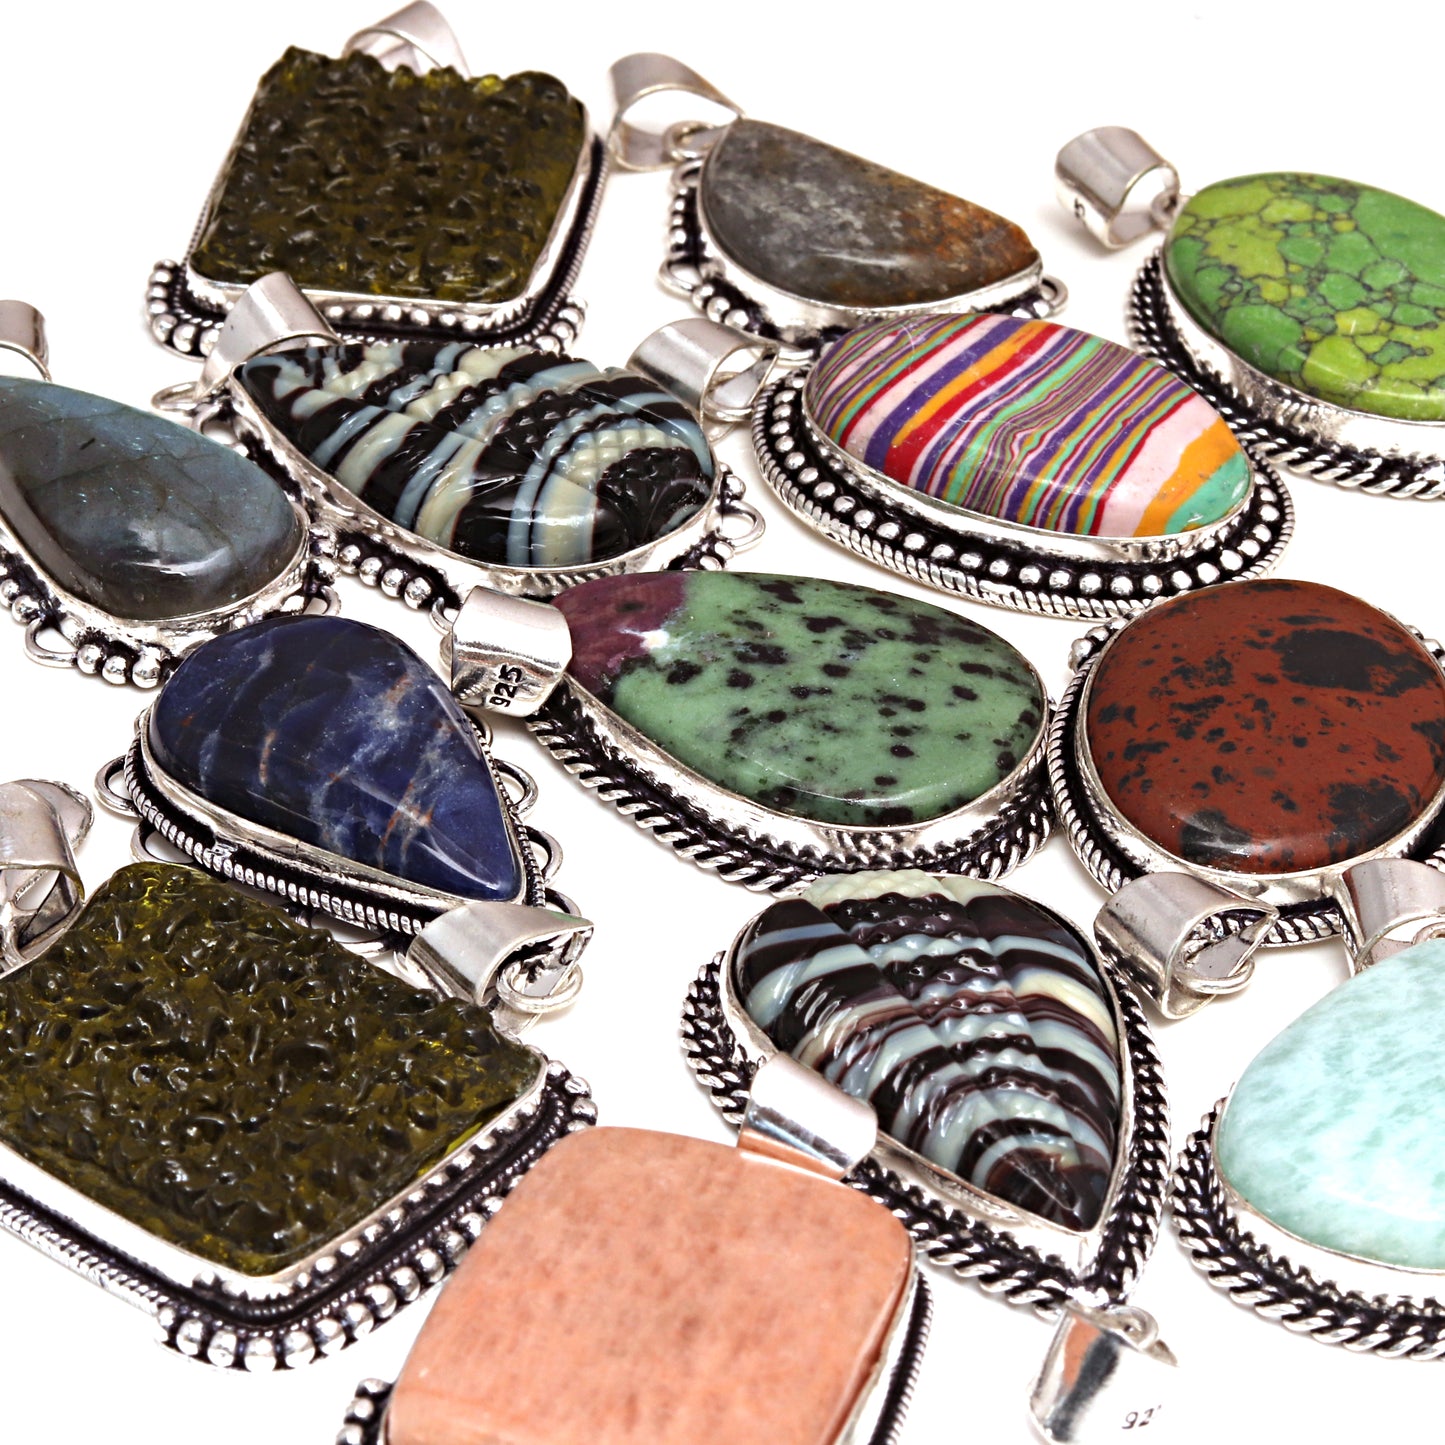 20 Pcs Lot 925 Sterling Silver Mix Gemstone Lot Pendant , Mix Designs For Men's & Women's Silver Jewelry Necklace